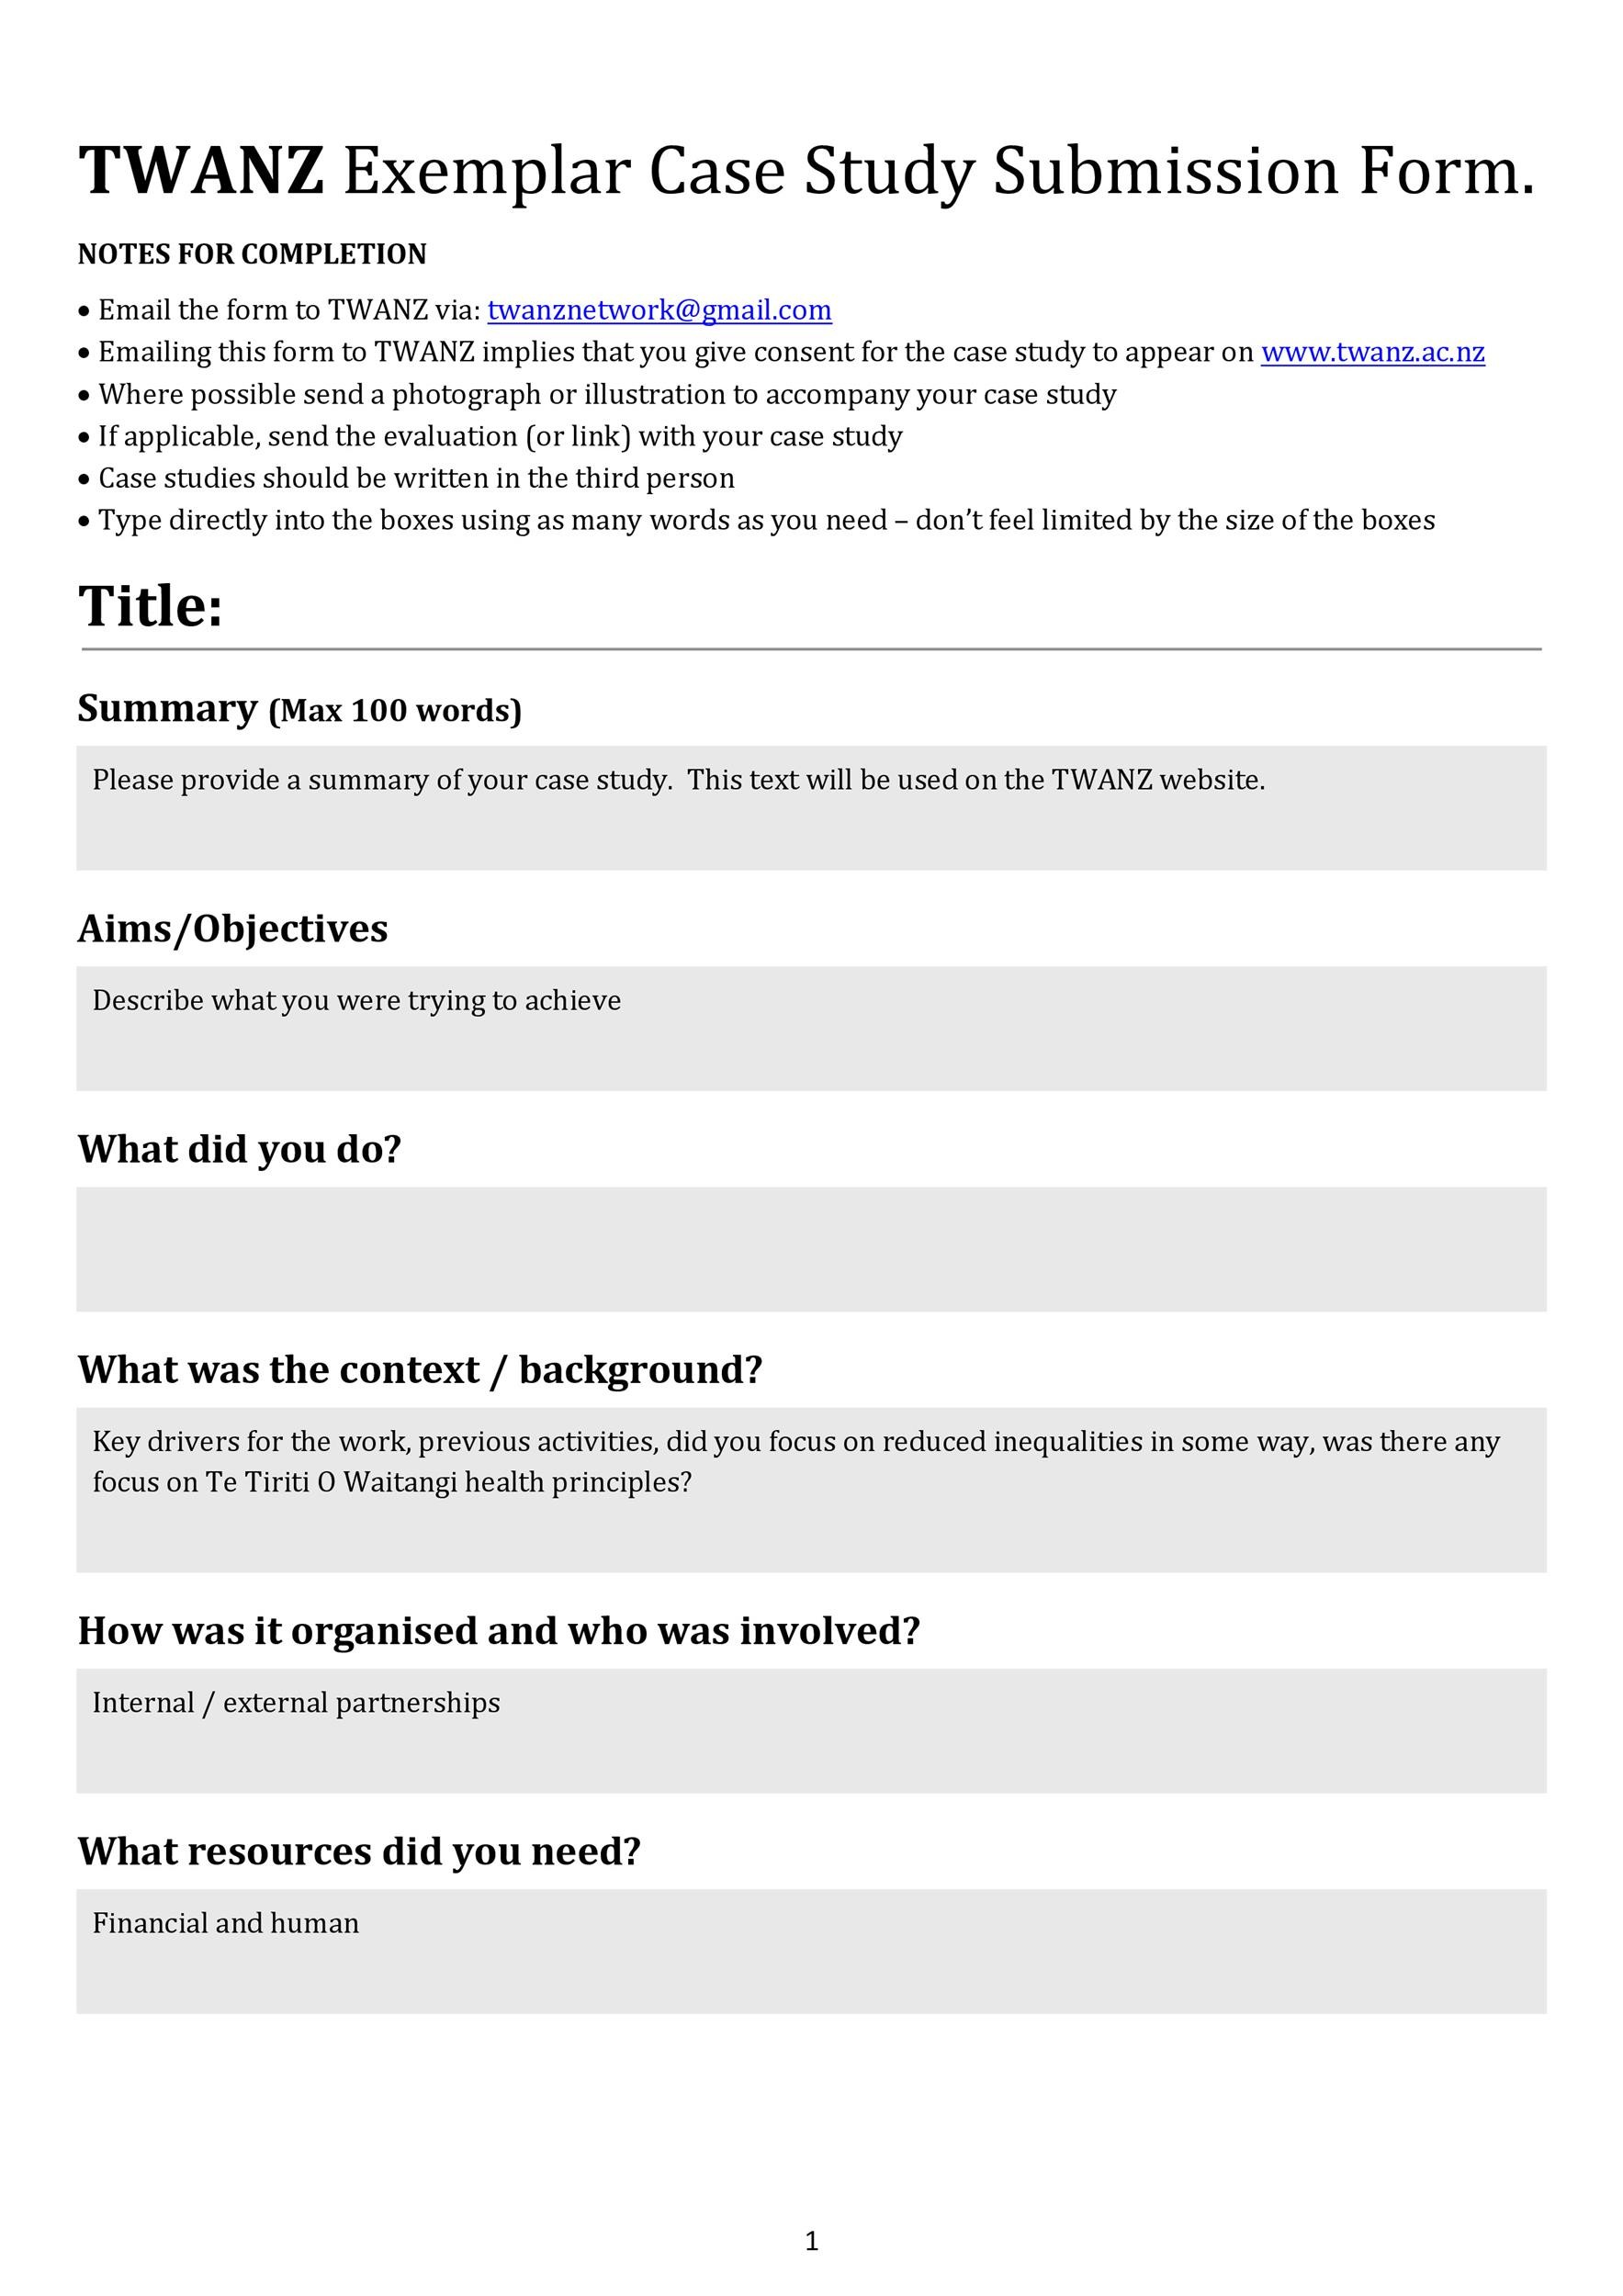 Healthcare Case Study Template from templatelab.com